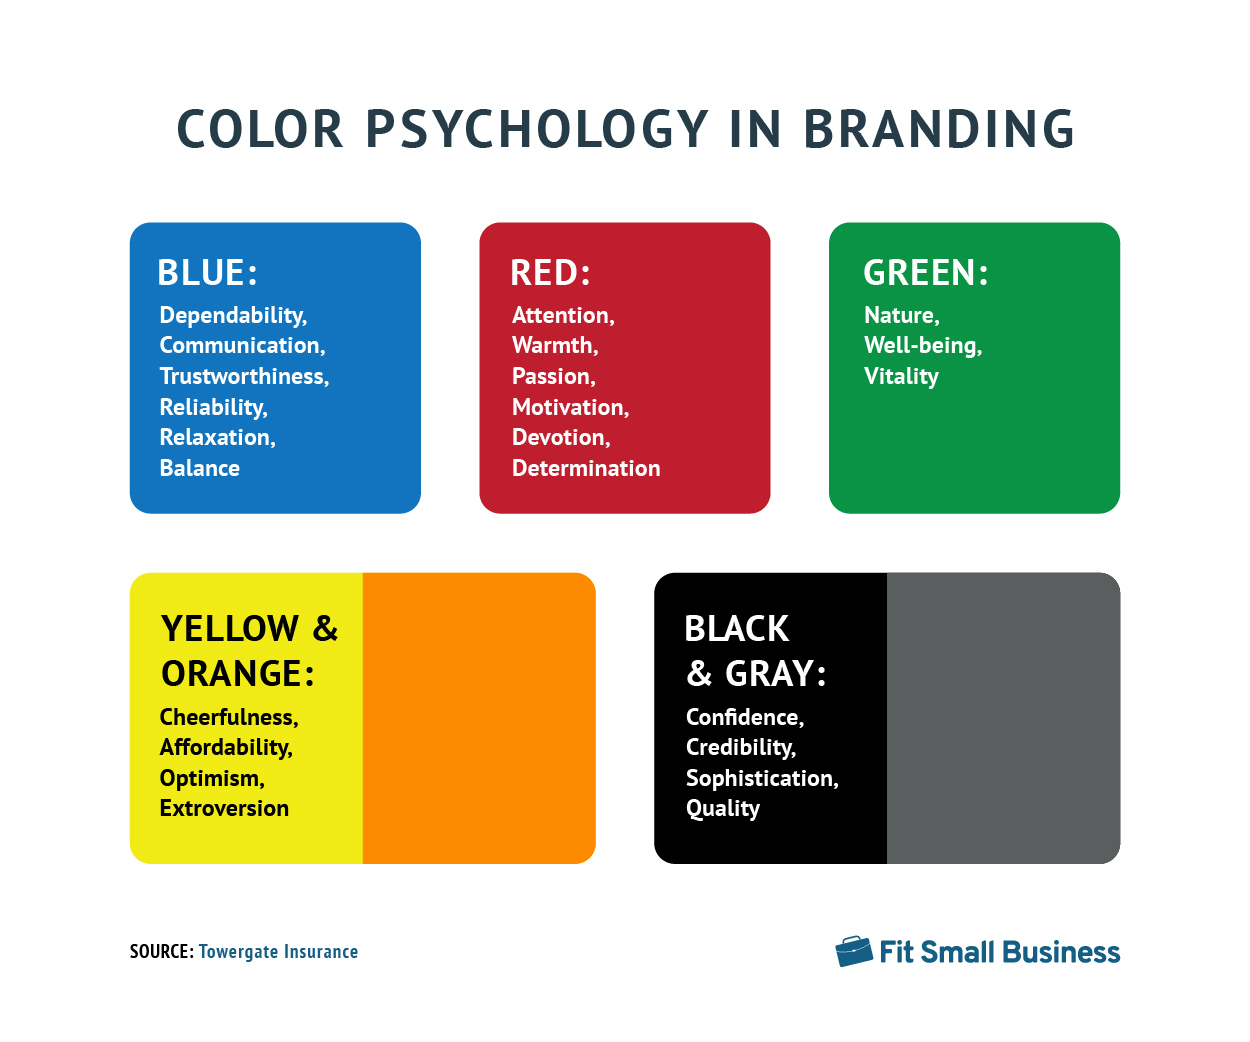 Color psychology meaning for blue, red, green, yellow, orange, gray, and black.